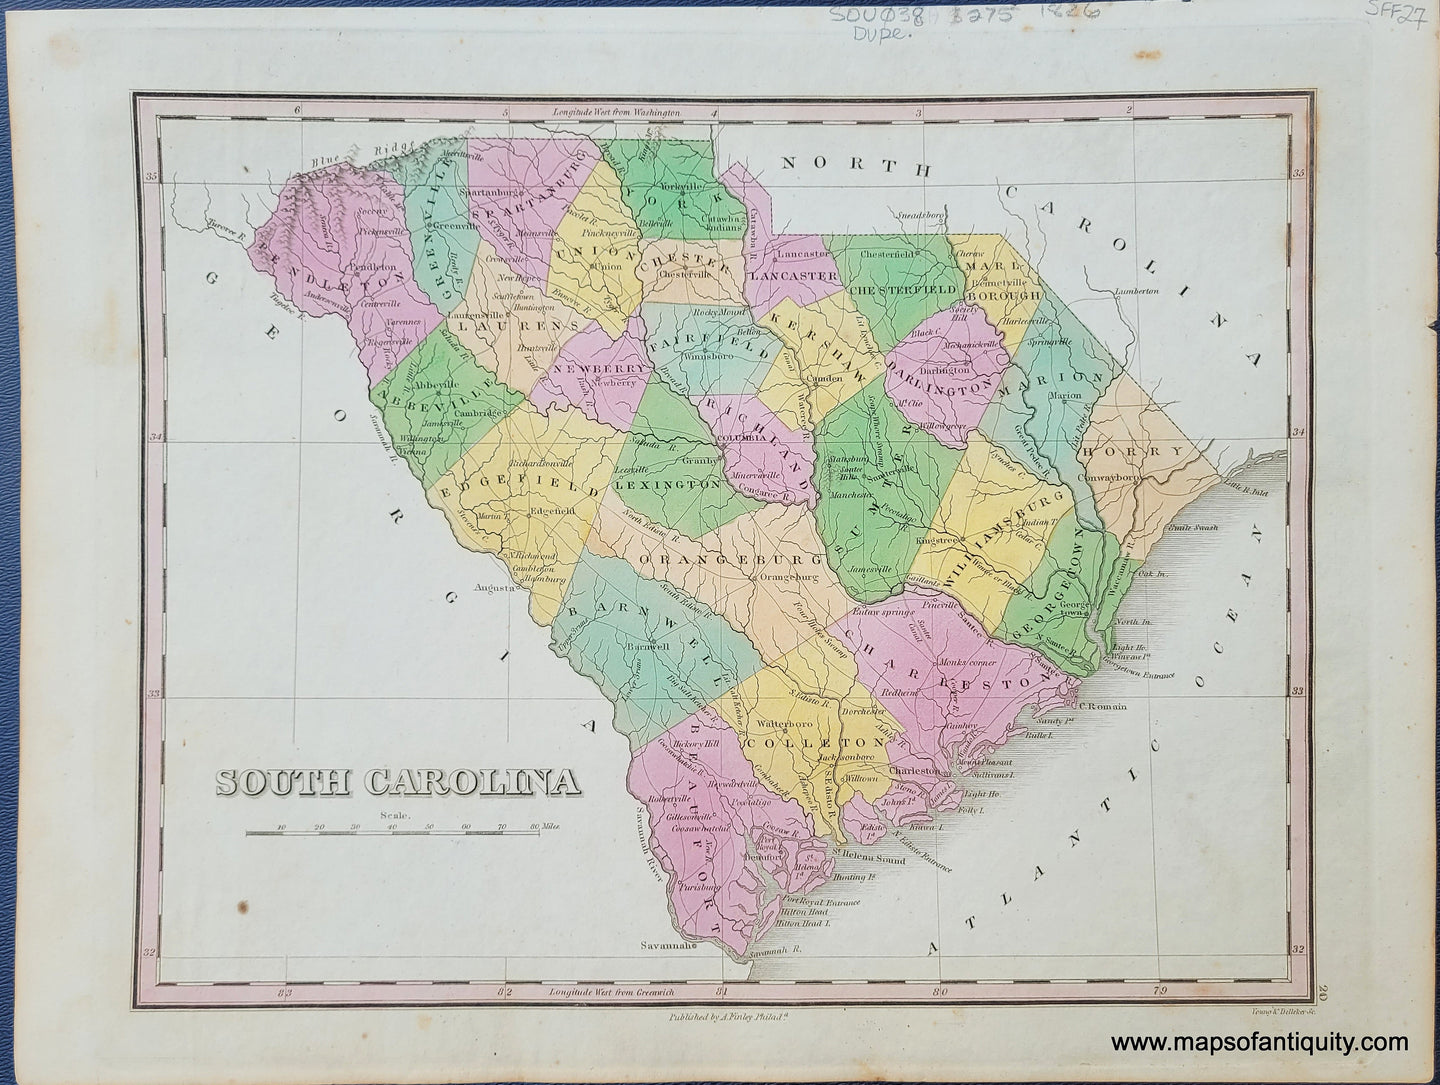 Antique-Hand-Colored-Map-South-Carolina-United-States-South-1826-Anthony-Finley-Maps-Of-Antiquity